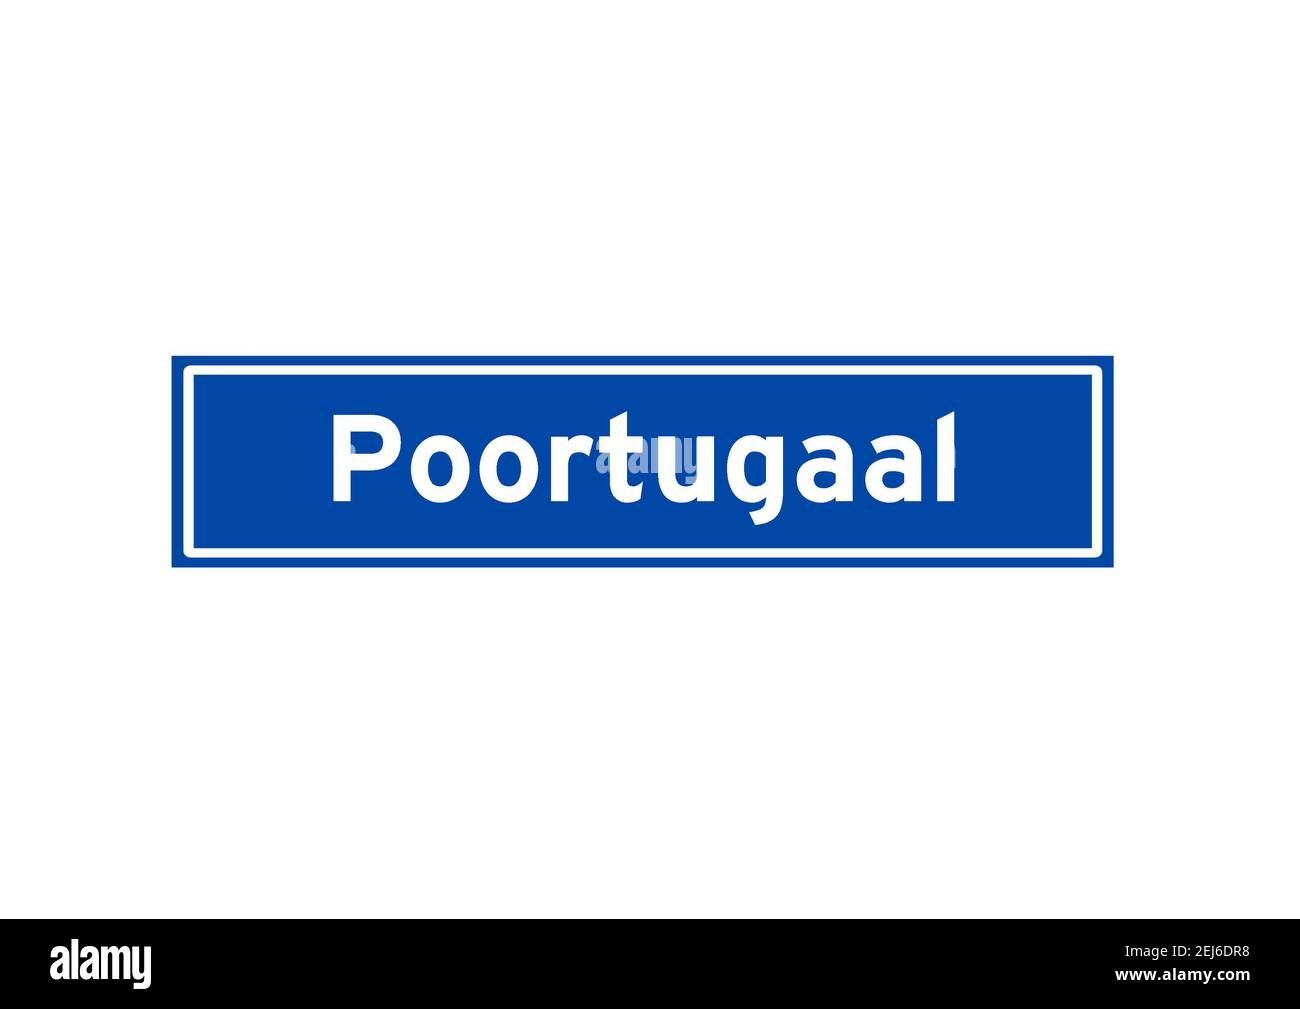 Poortugaal isolated Dutch place name sign. City sign from the Netherlands. Stock Photo